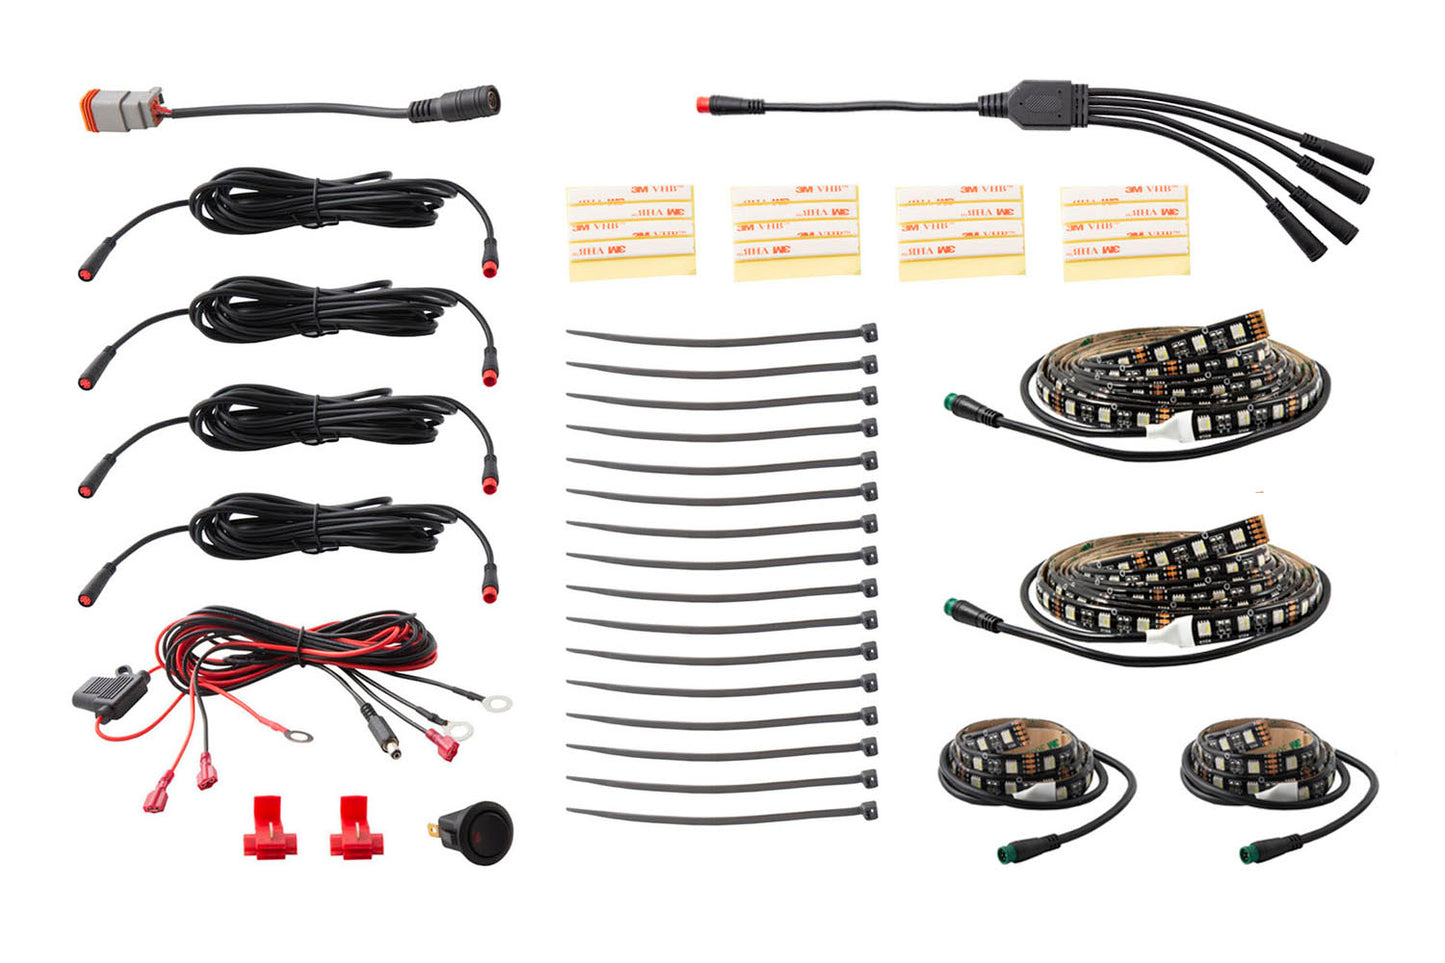 RGBW Multicolor Underglow LED Kit Diode Dynamics